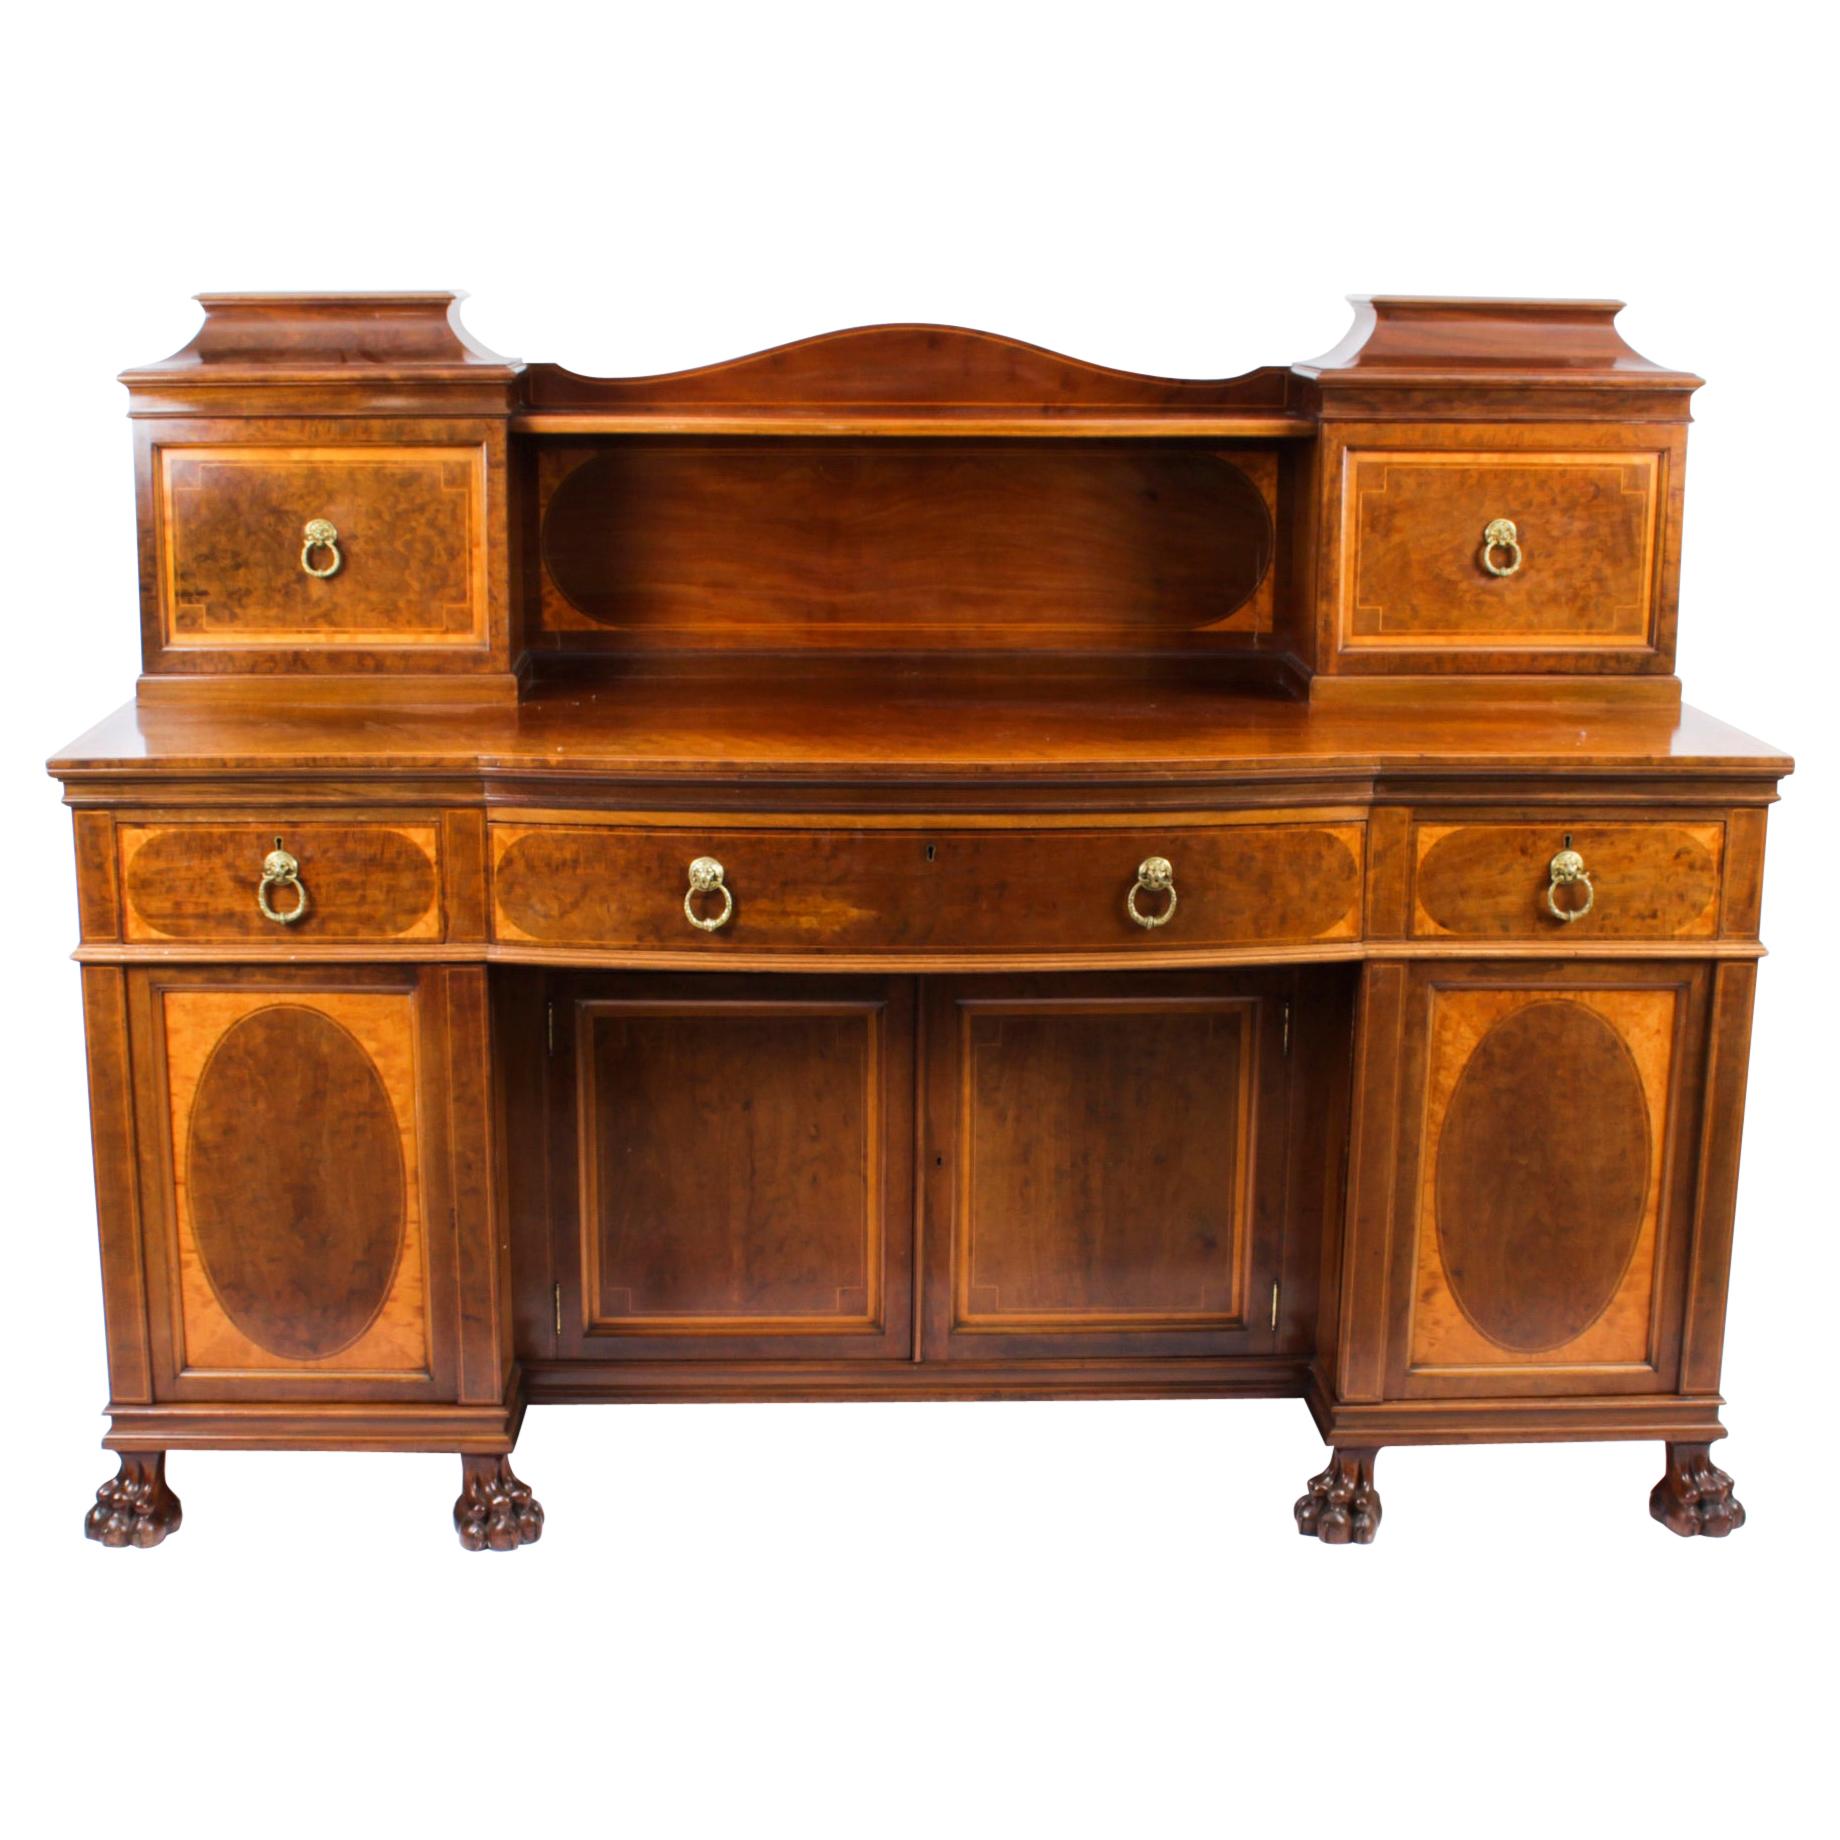 Antique Edwardian Sheraton Revival Mahogany Sideboard, 19th C For Sale